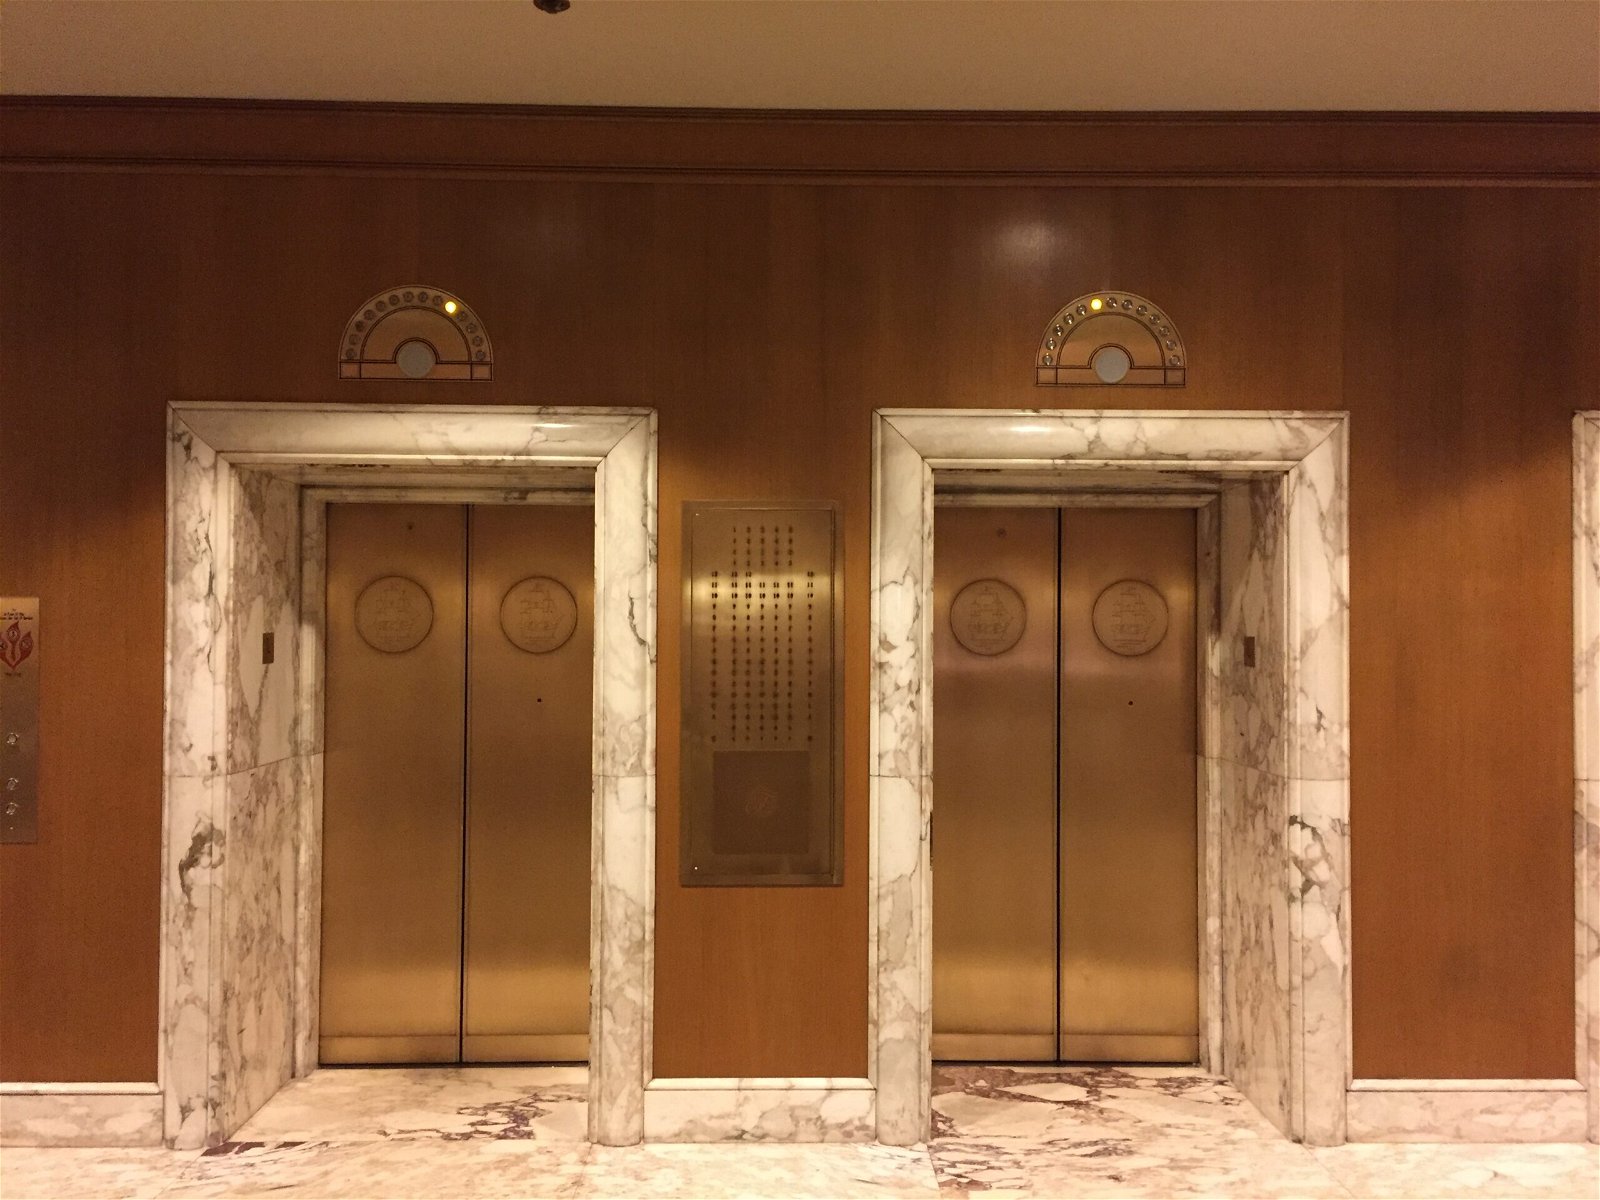 Elevator bank at the Fairmont Olympic Hotel